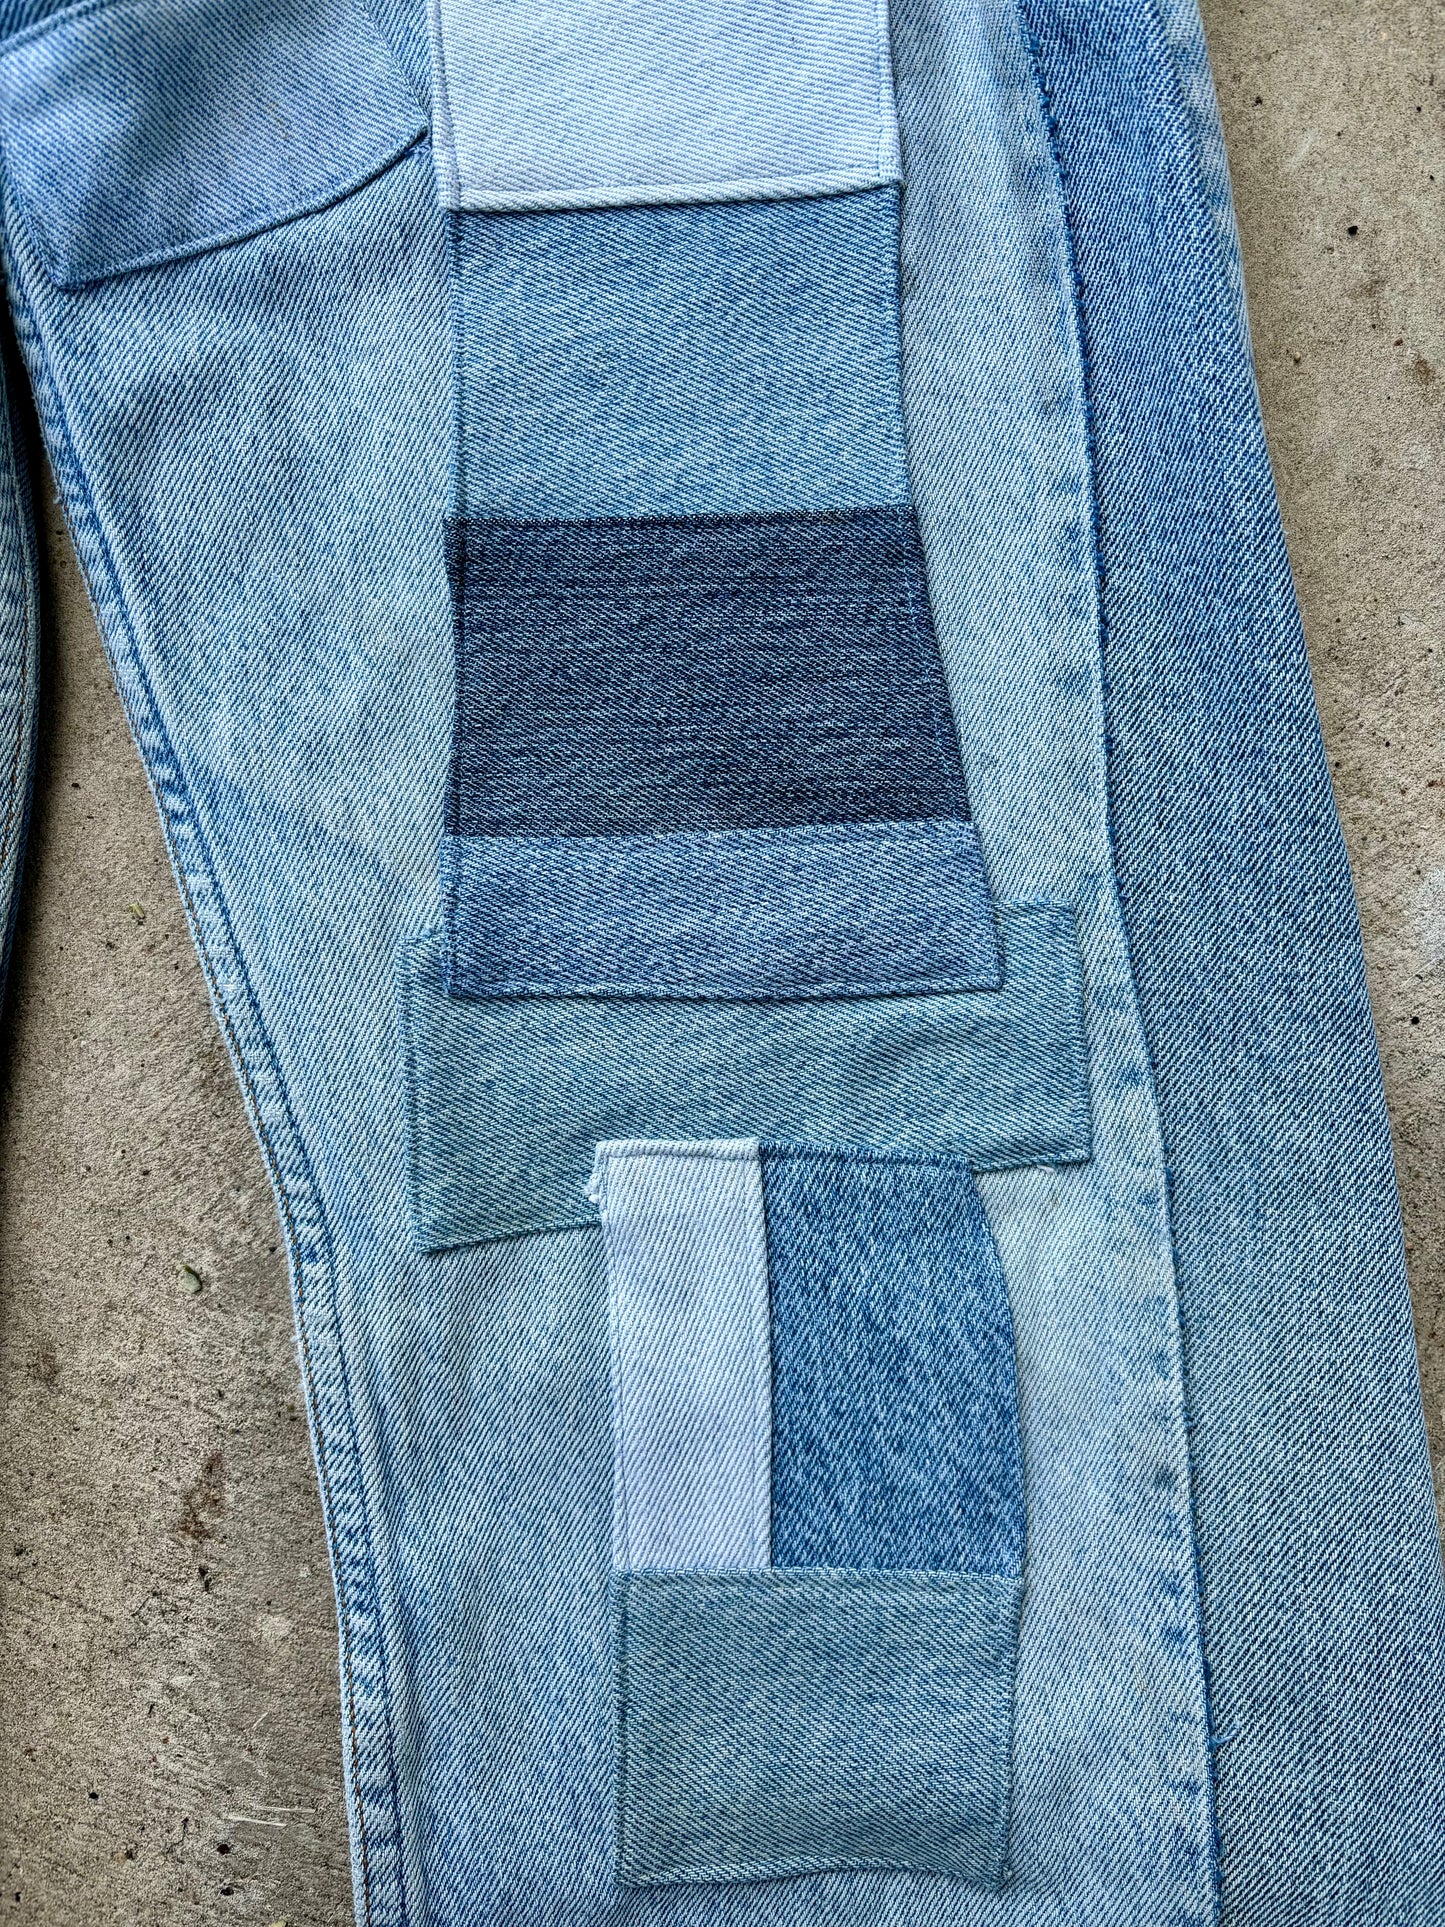 Fully Patched Levi's 501s